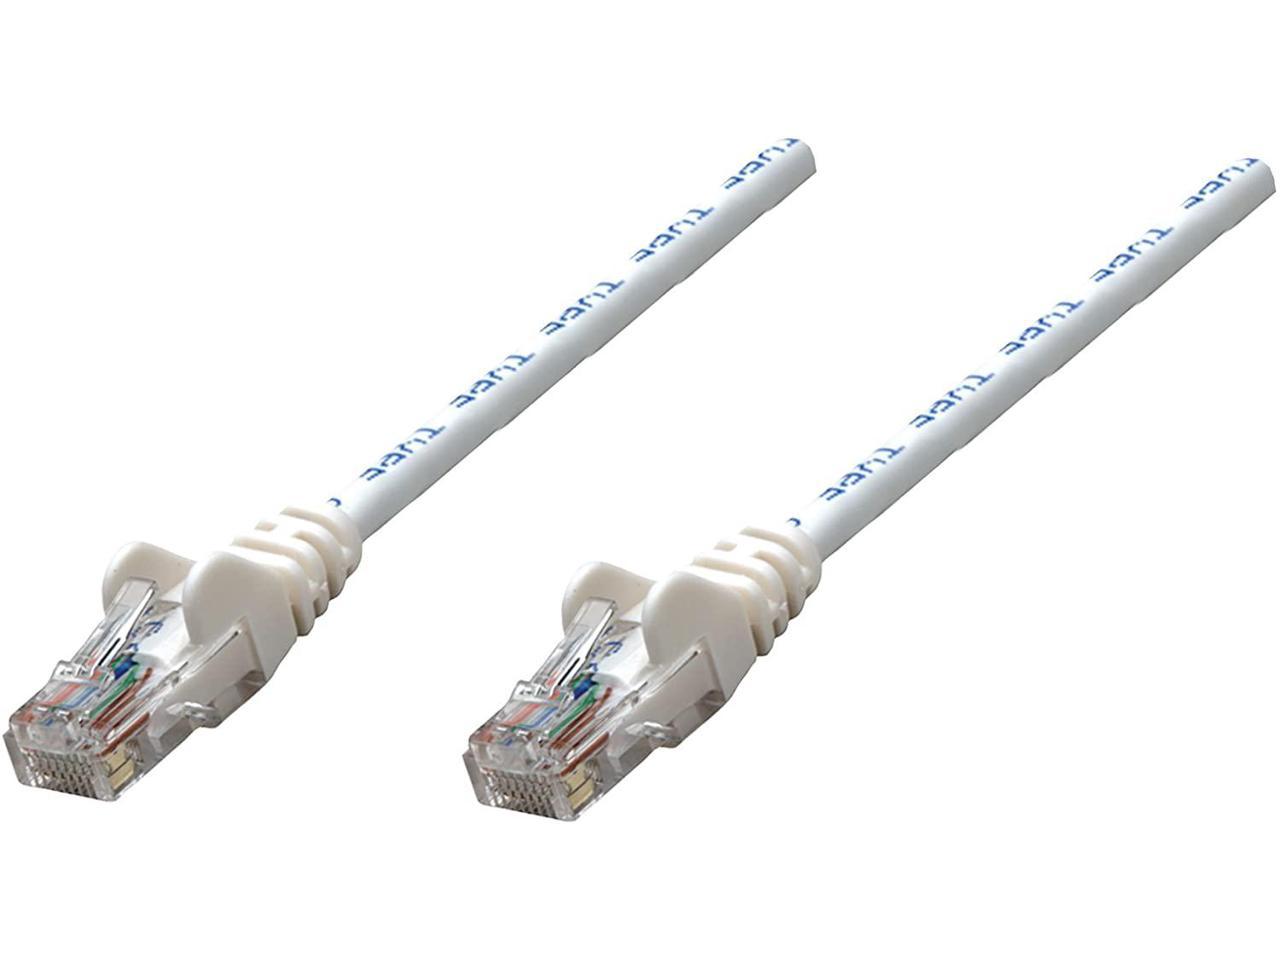 UTP Bootless Green PcConnectTM CAT6 50 feet Cable 